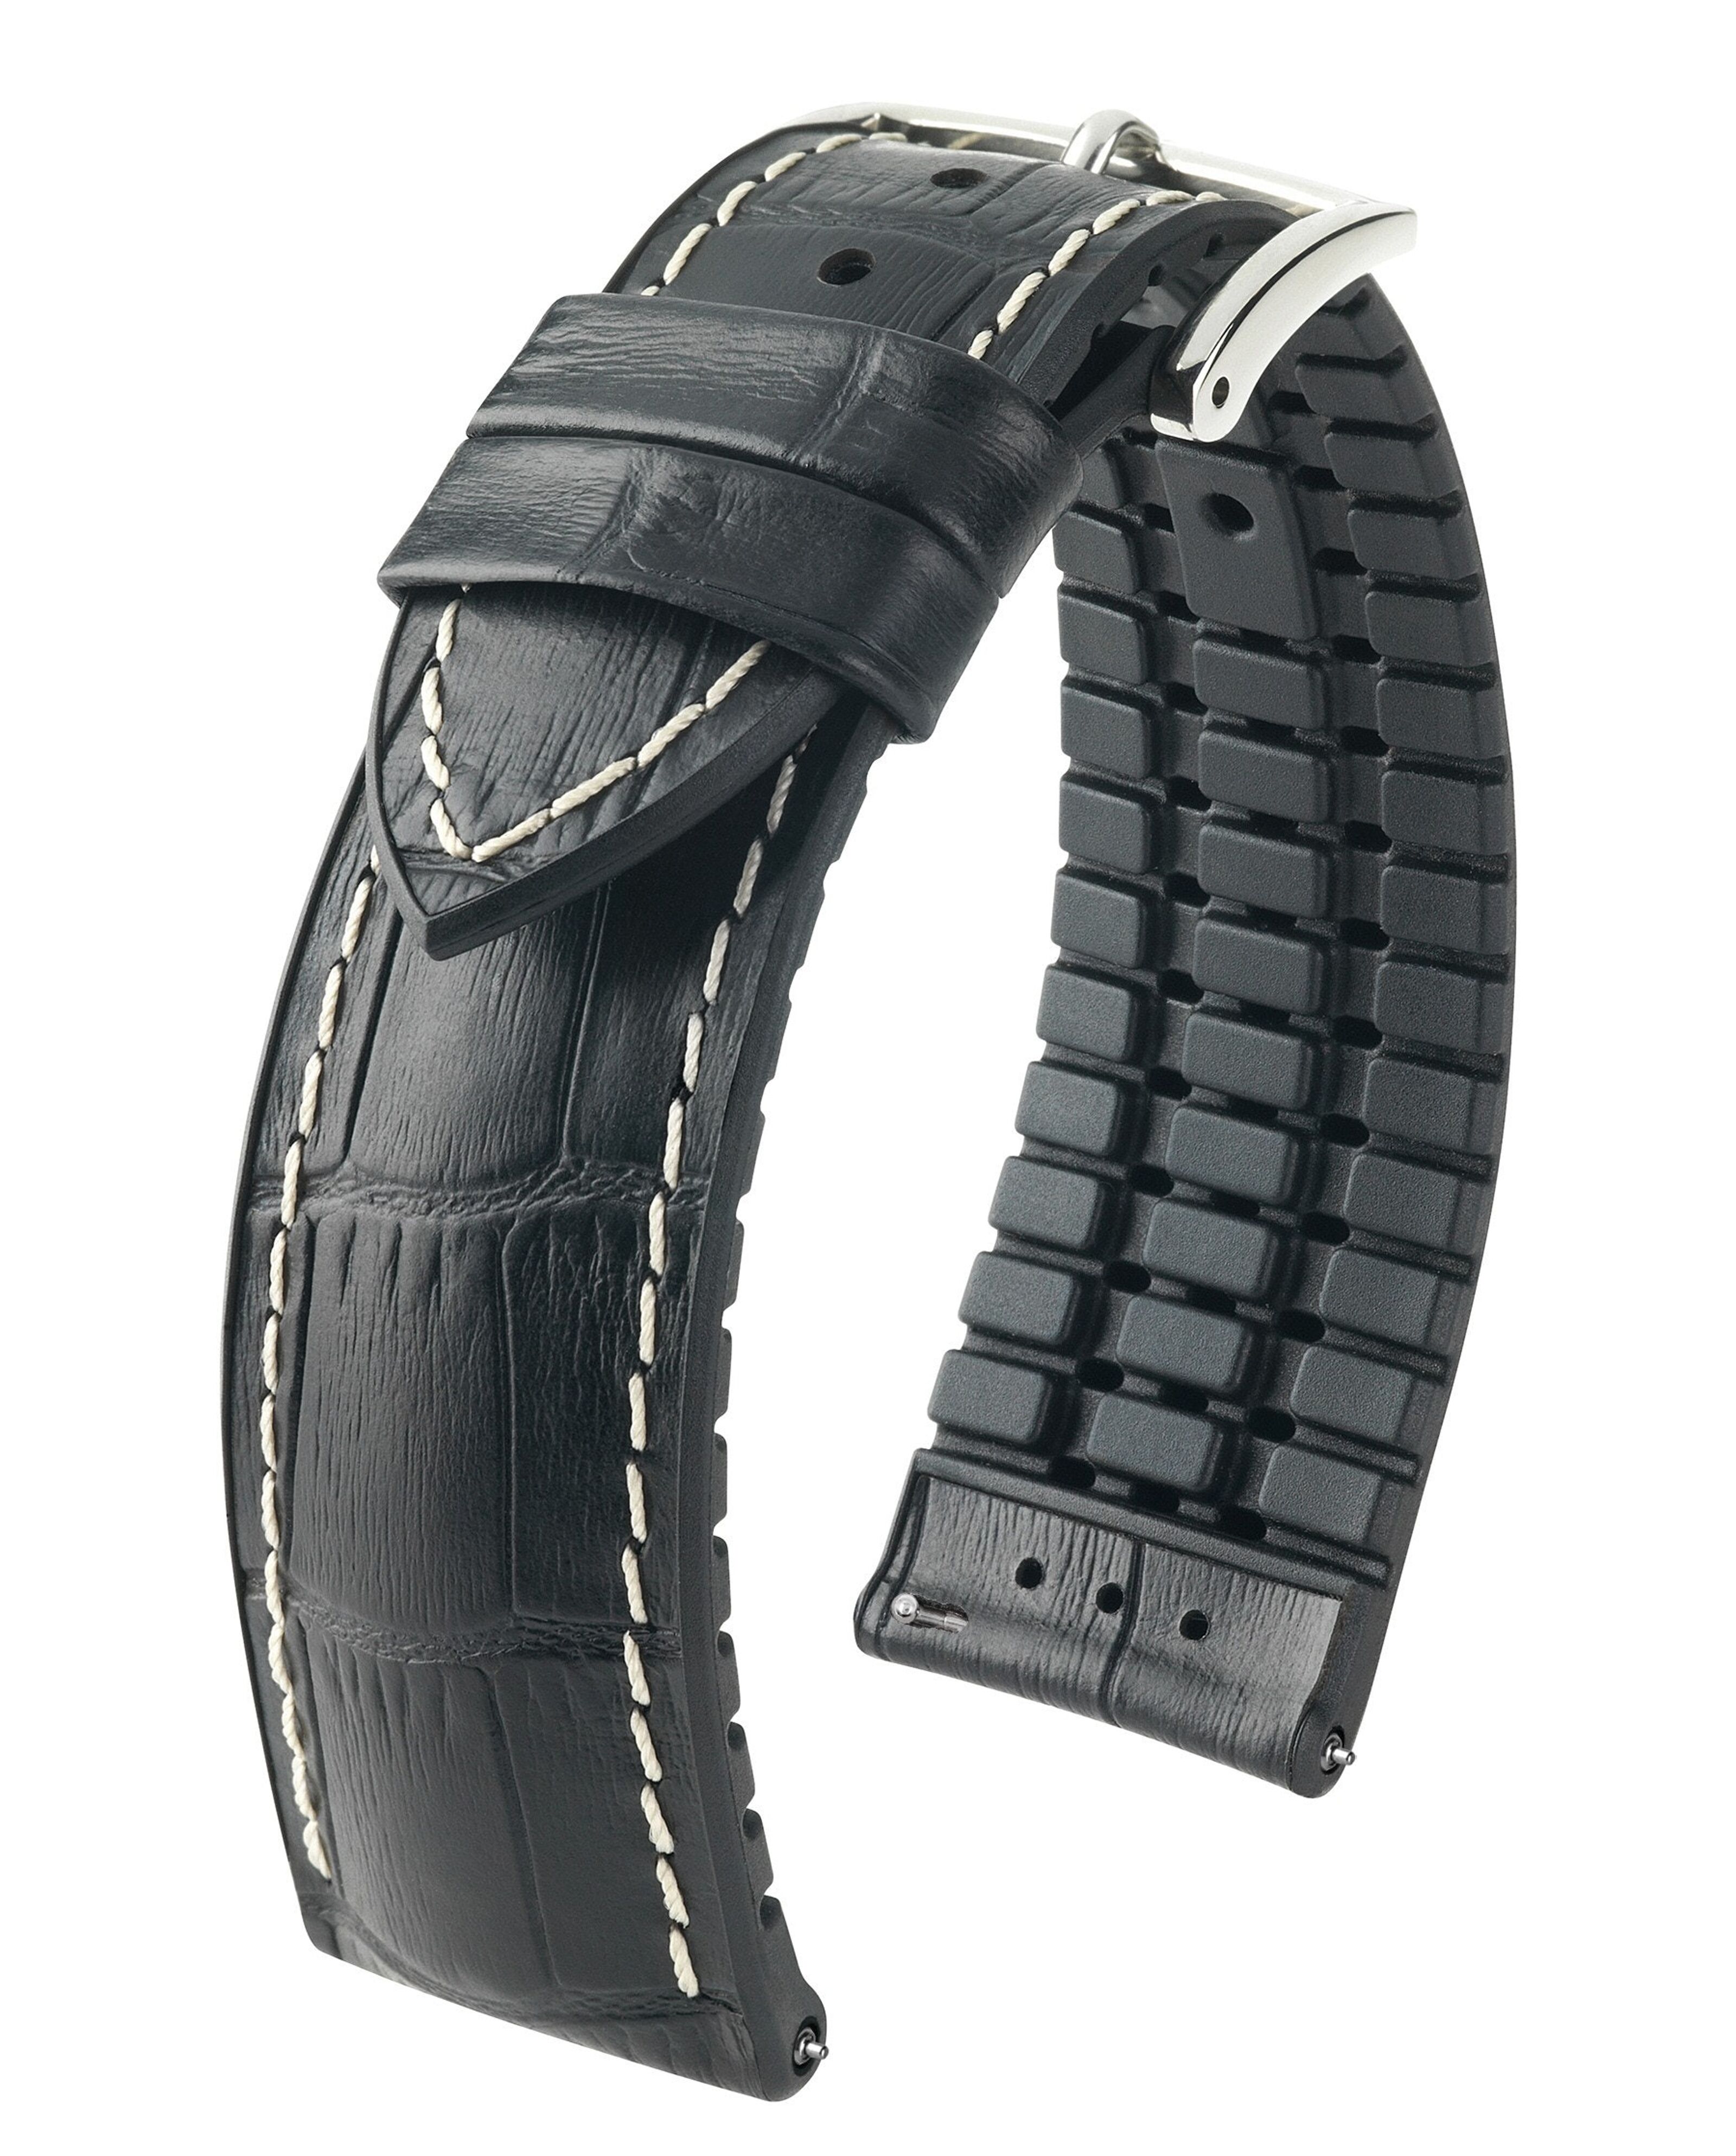 Buy wholesale HIRSCH watch strap George L - Italian calfskin with rubber  core - alligator embossing - sporty - for women & men - black - available  in the attachment widths of 20mm, 22mm and 24mm